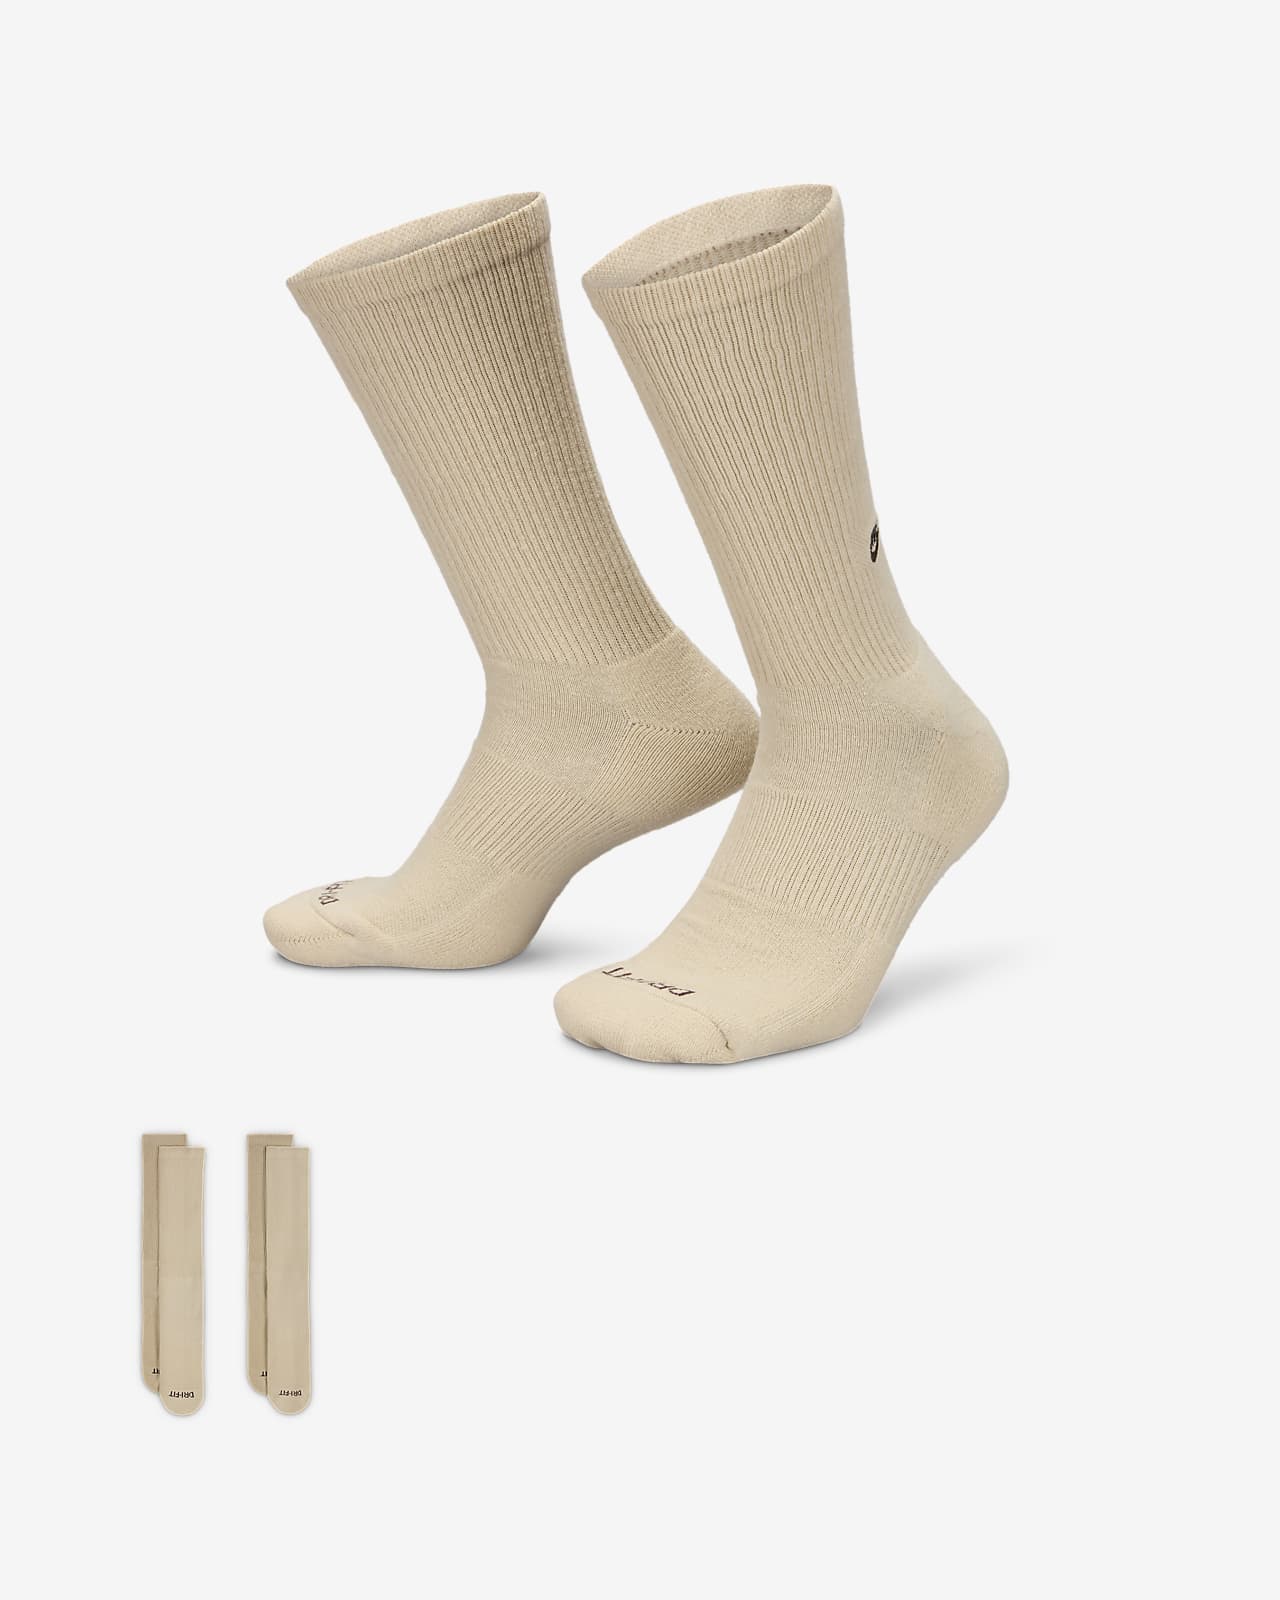 Chaussettes mi-mollet Nike Everyday Cushioned (2 paires)